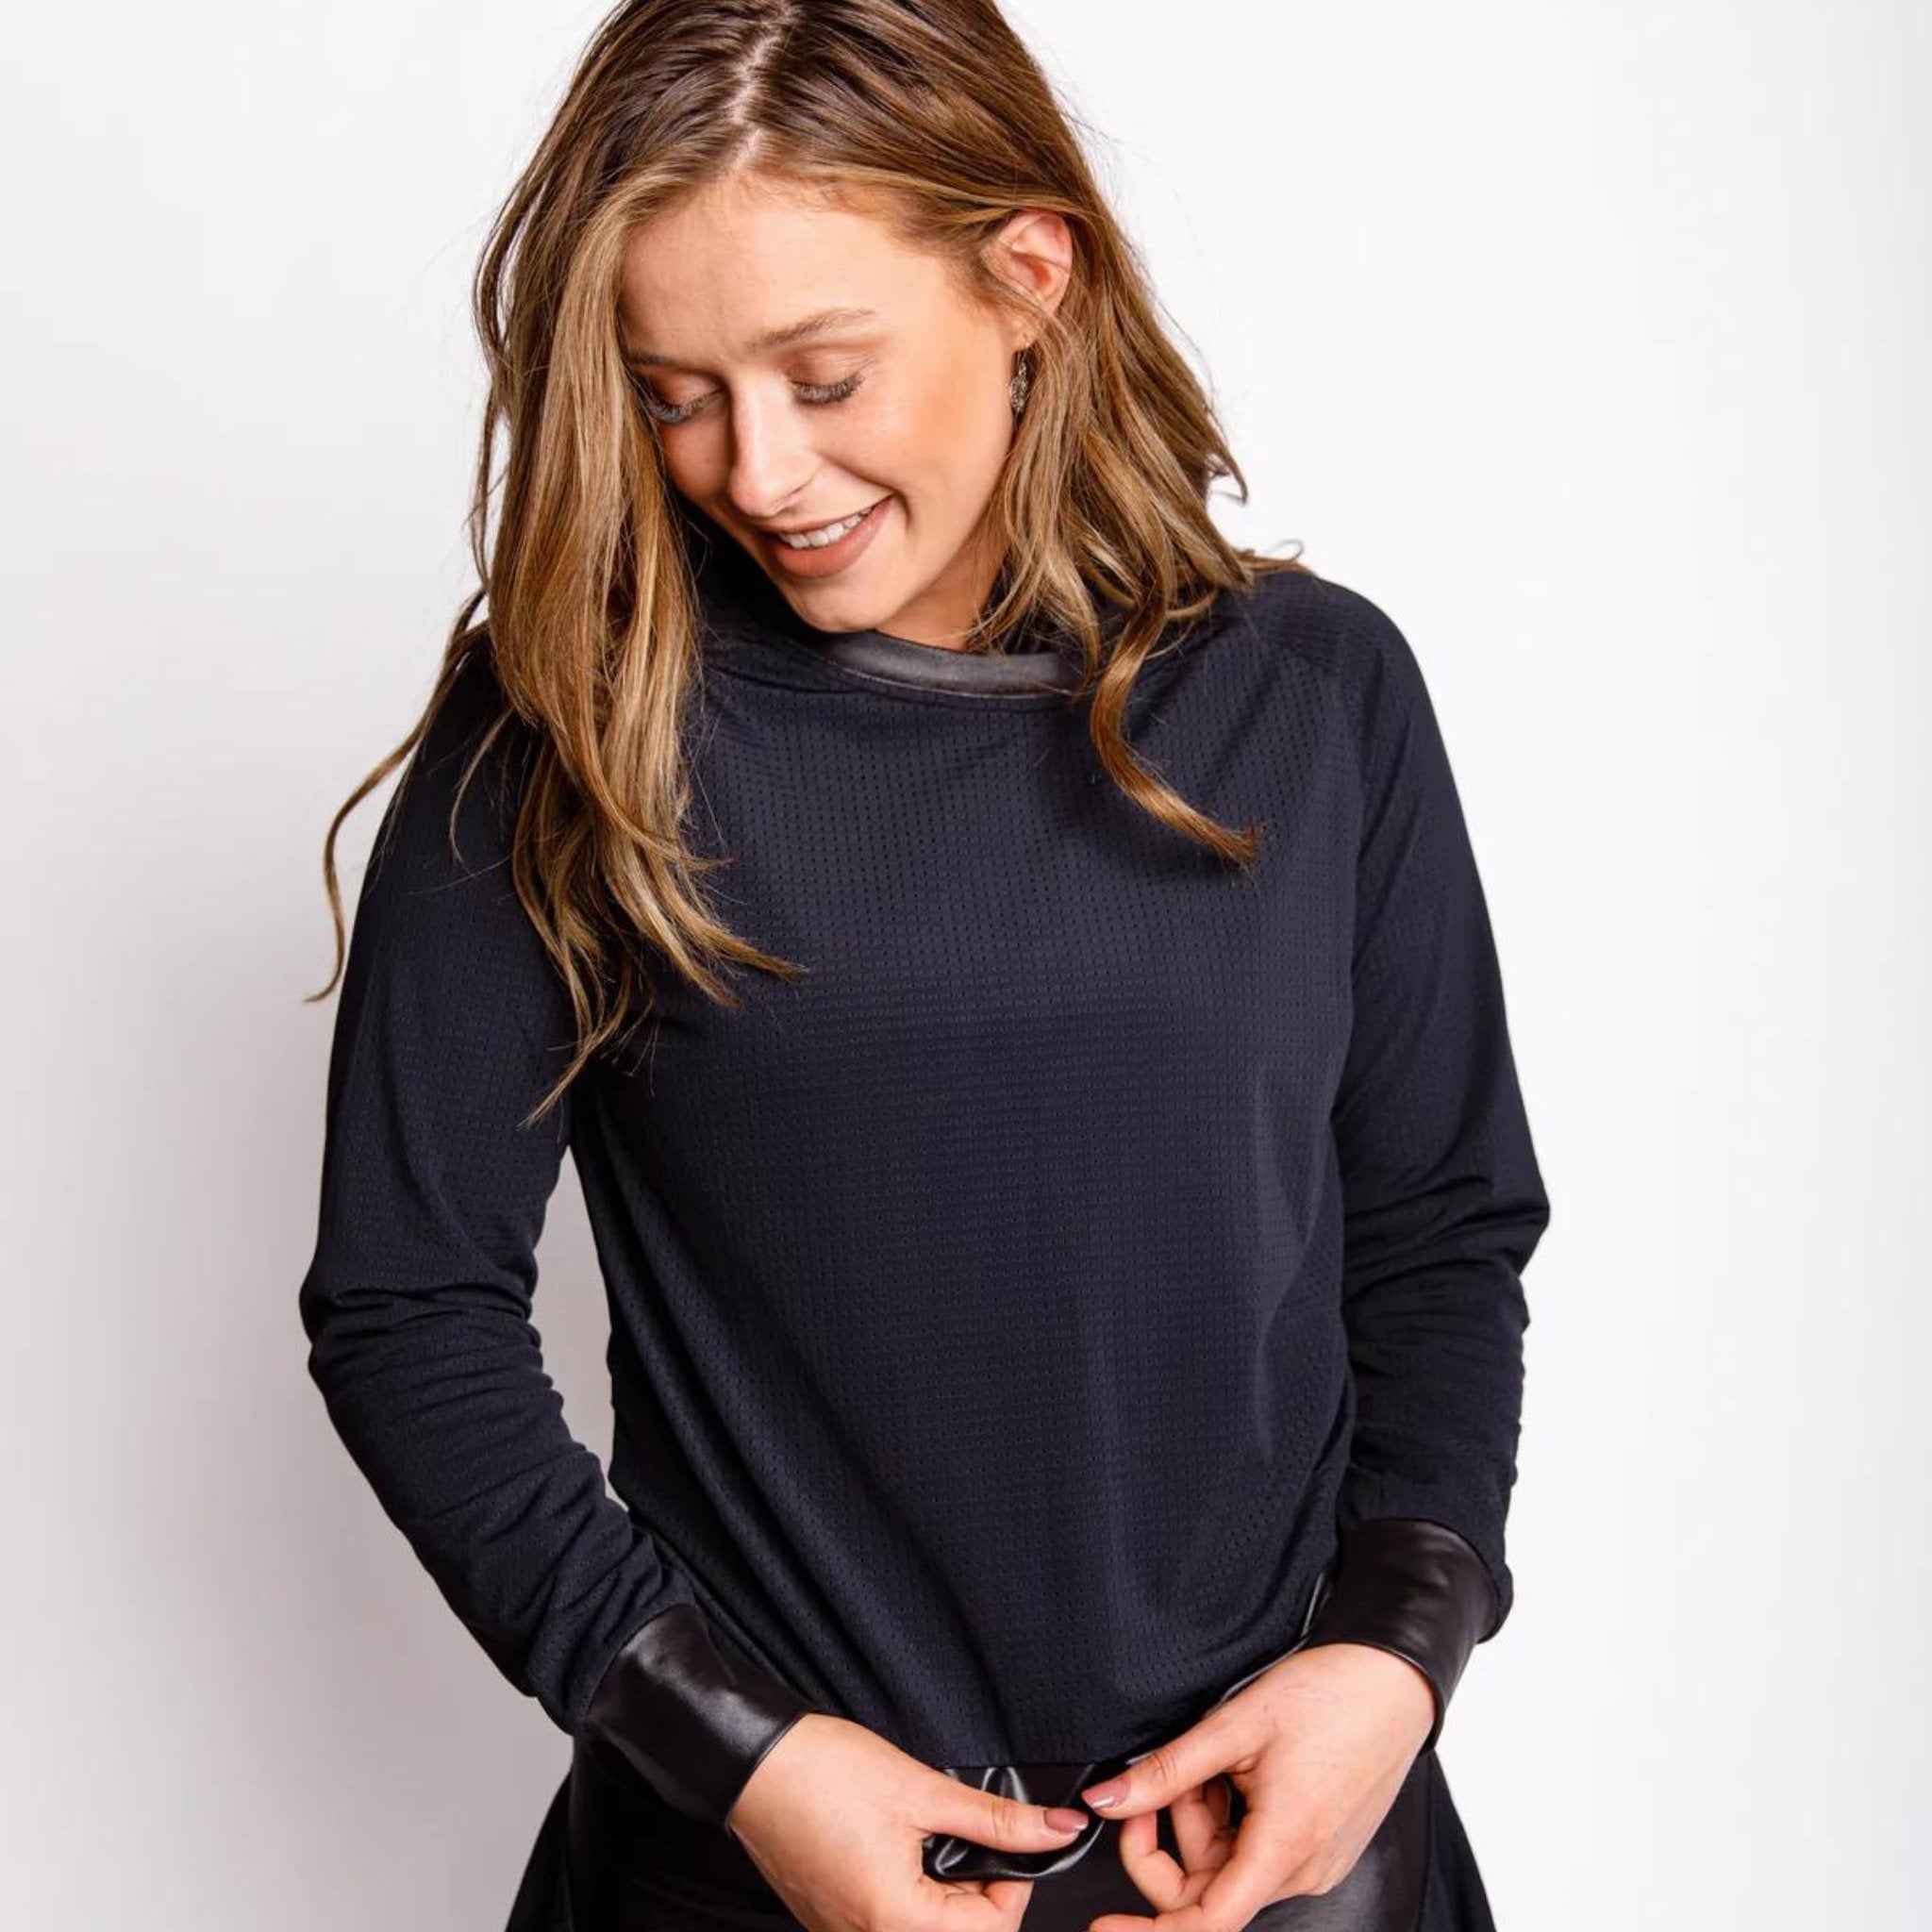 Lucky in "Leather" Long Sleeve Top - Fairway Fittings